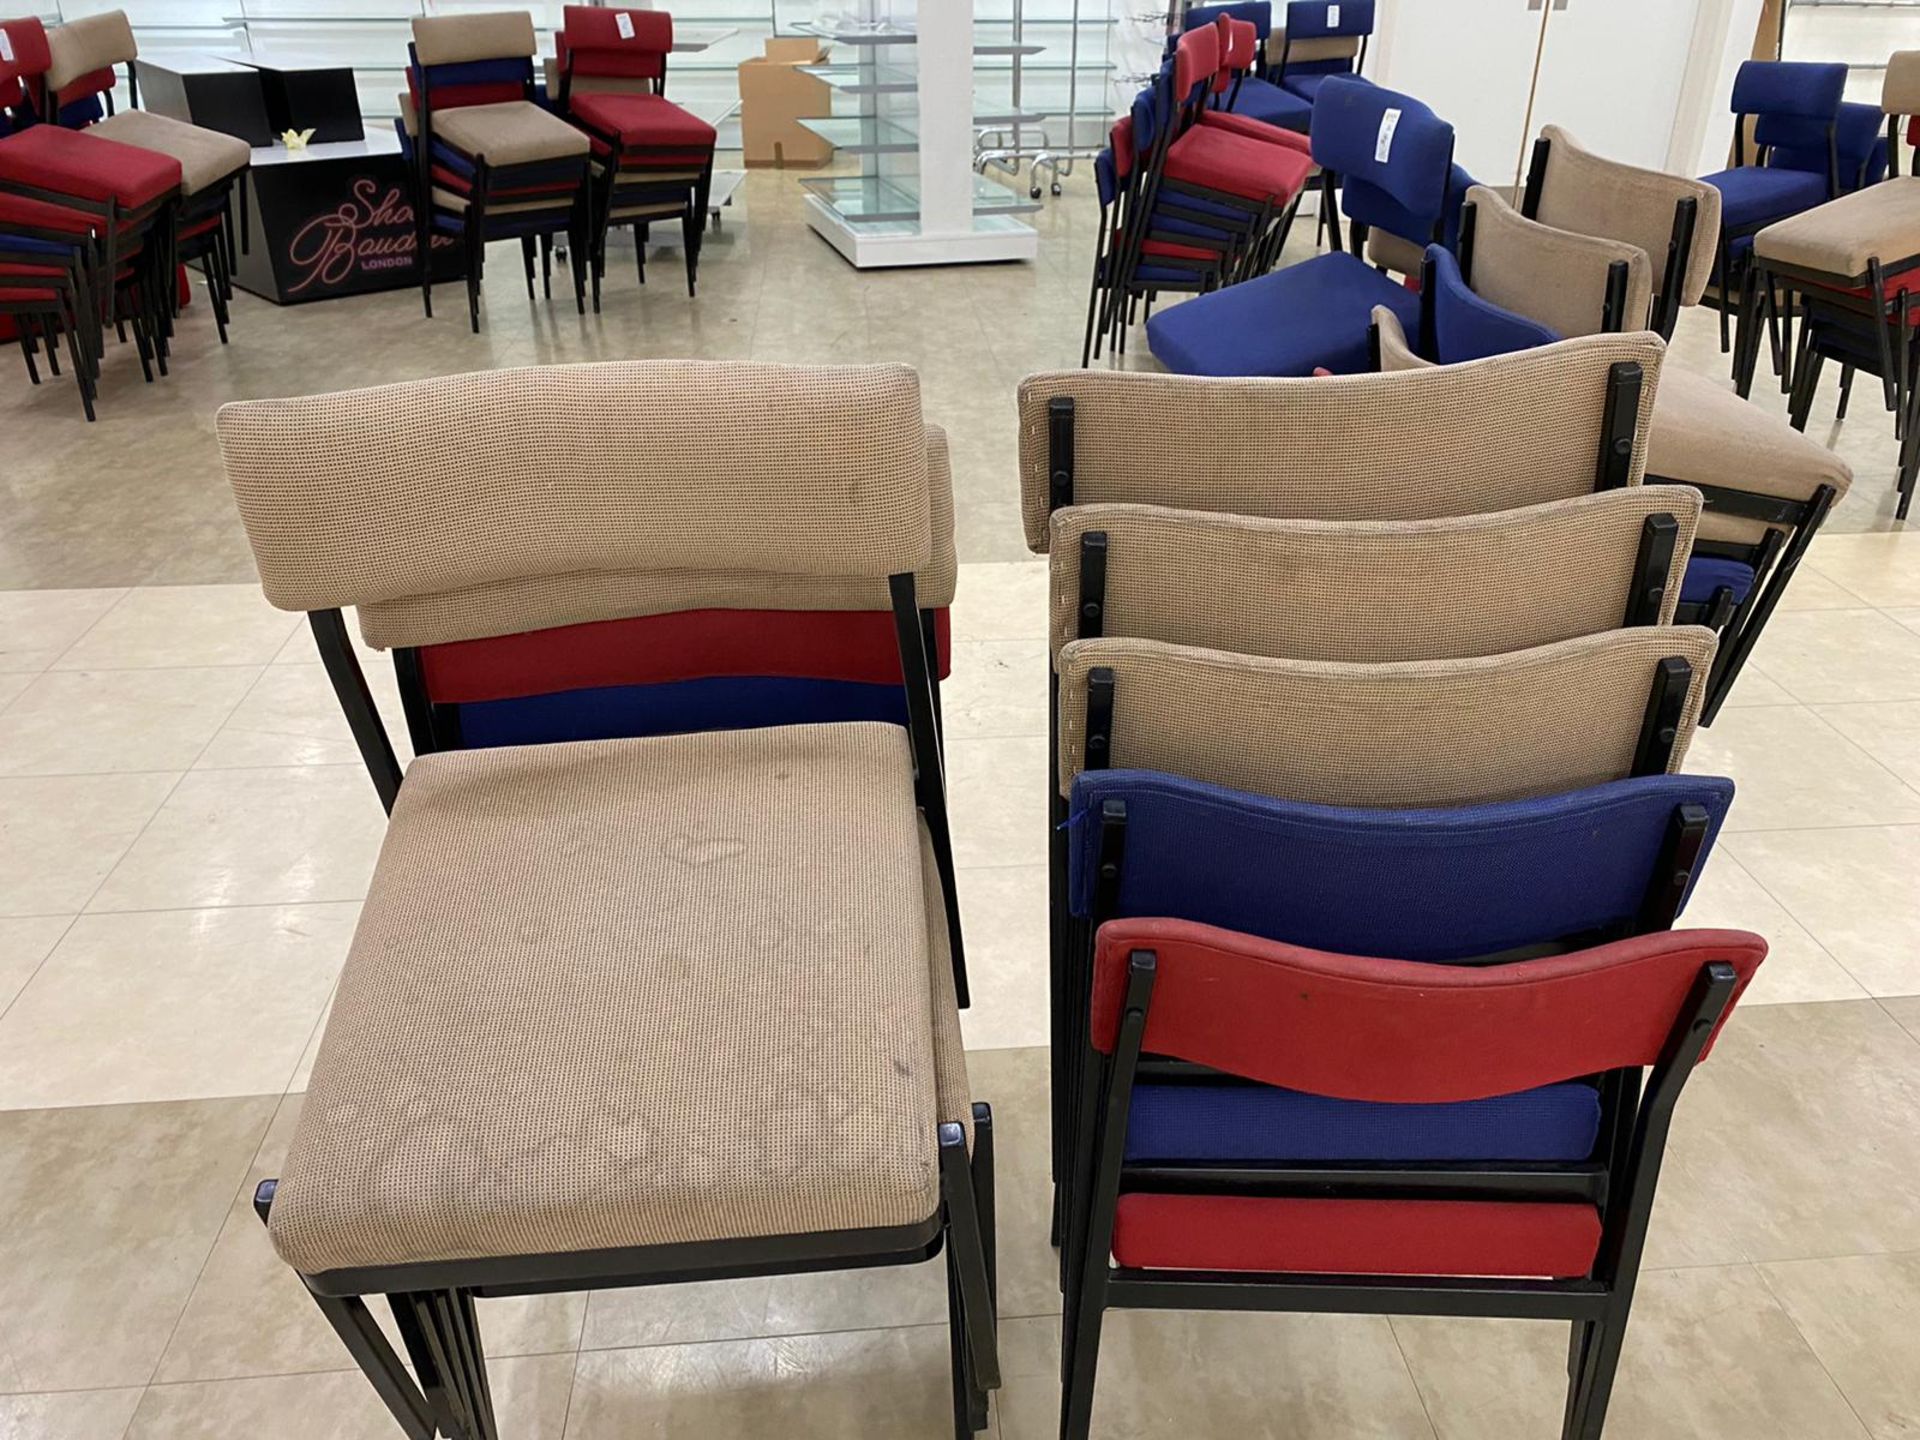 Lot Of 10 Miscellaneous Chairs Of Varying Colours